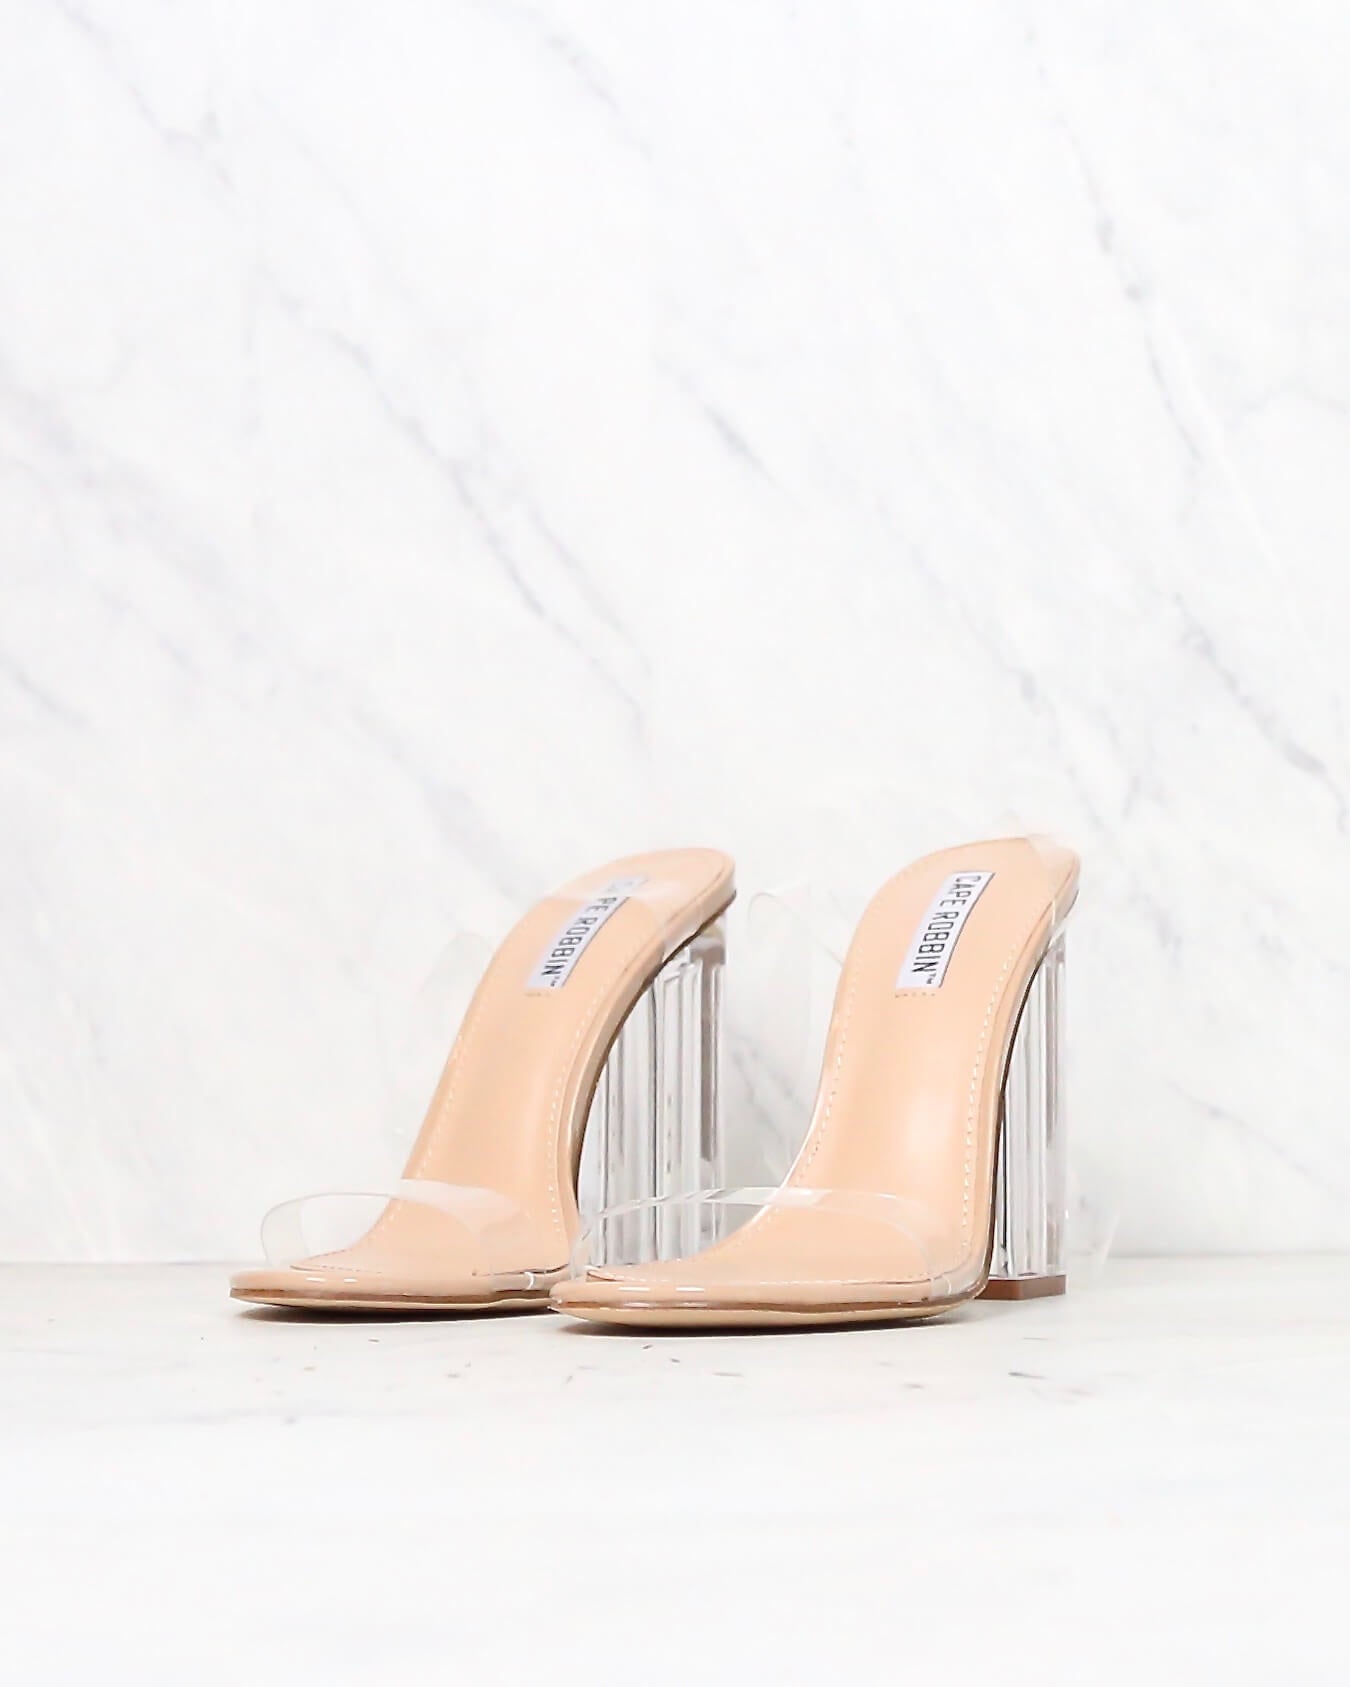 block heels without ankle strap